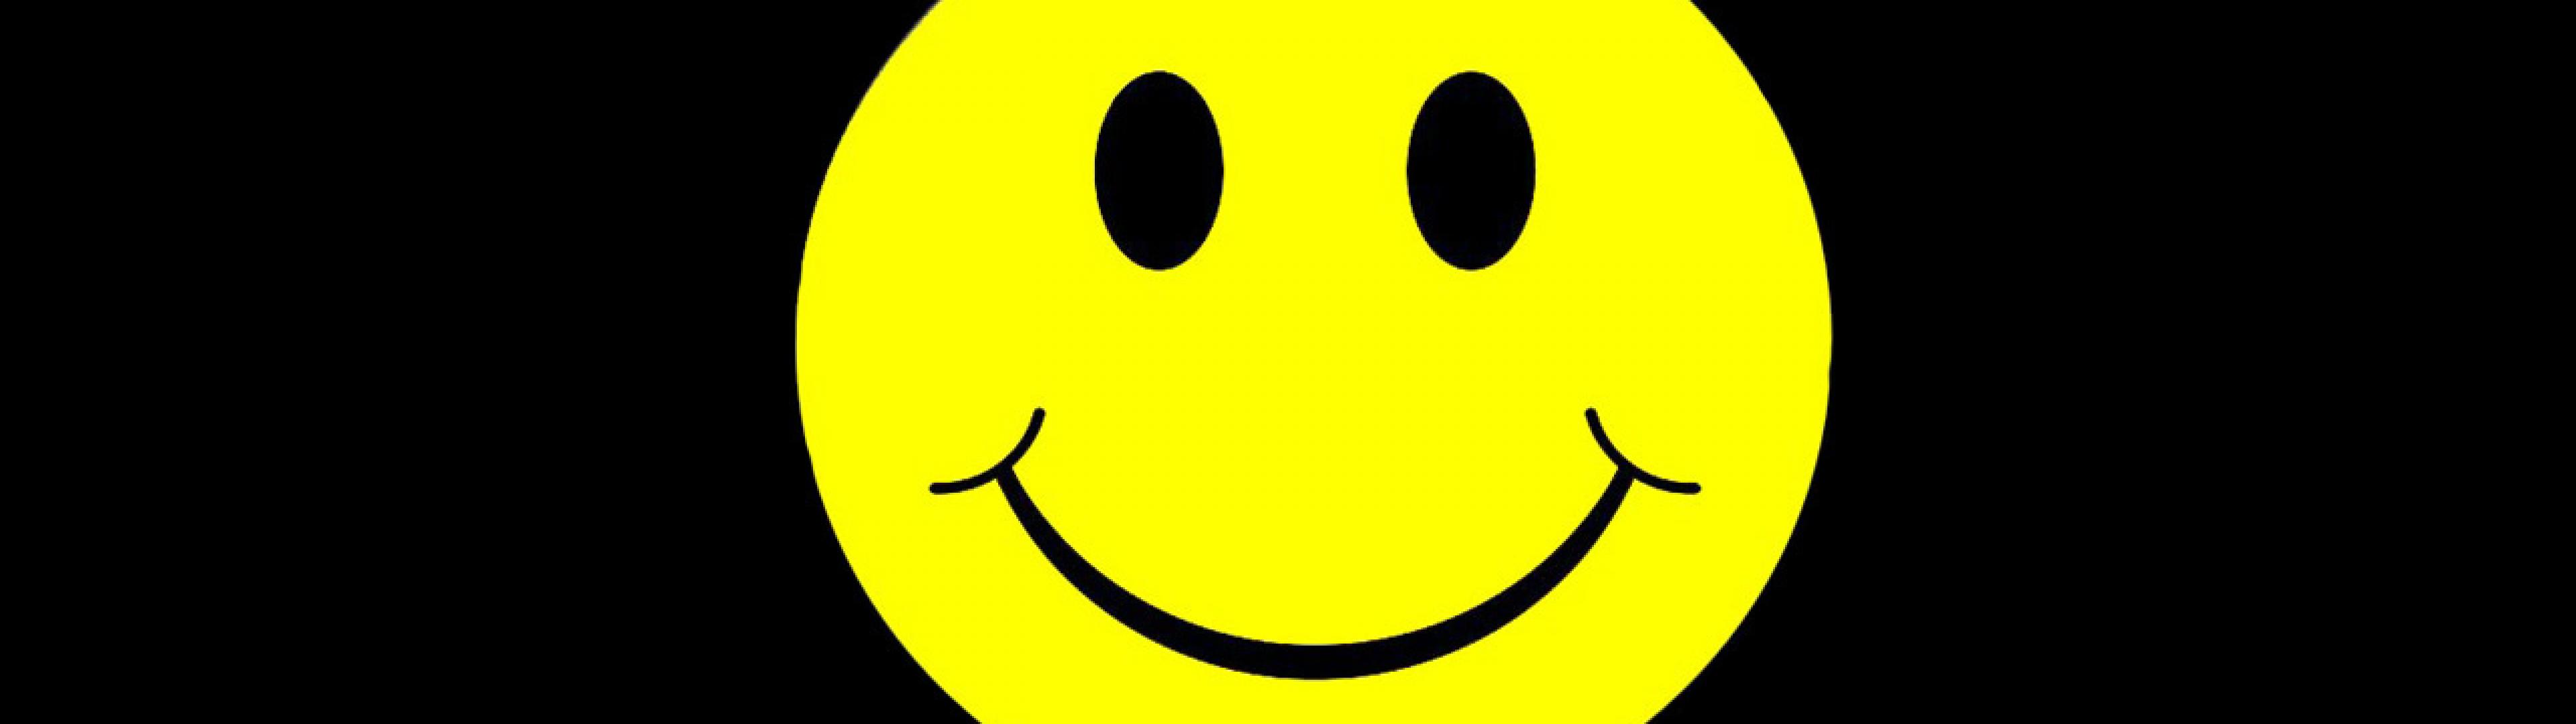 happy smiley face faces black background acid house Ultra or Dual High 3840x1080